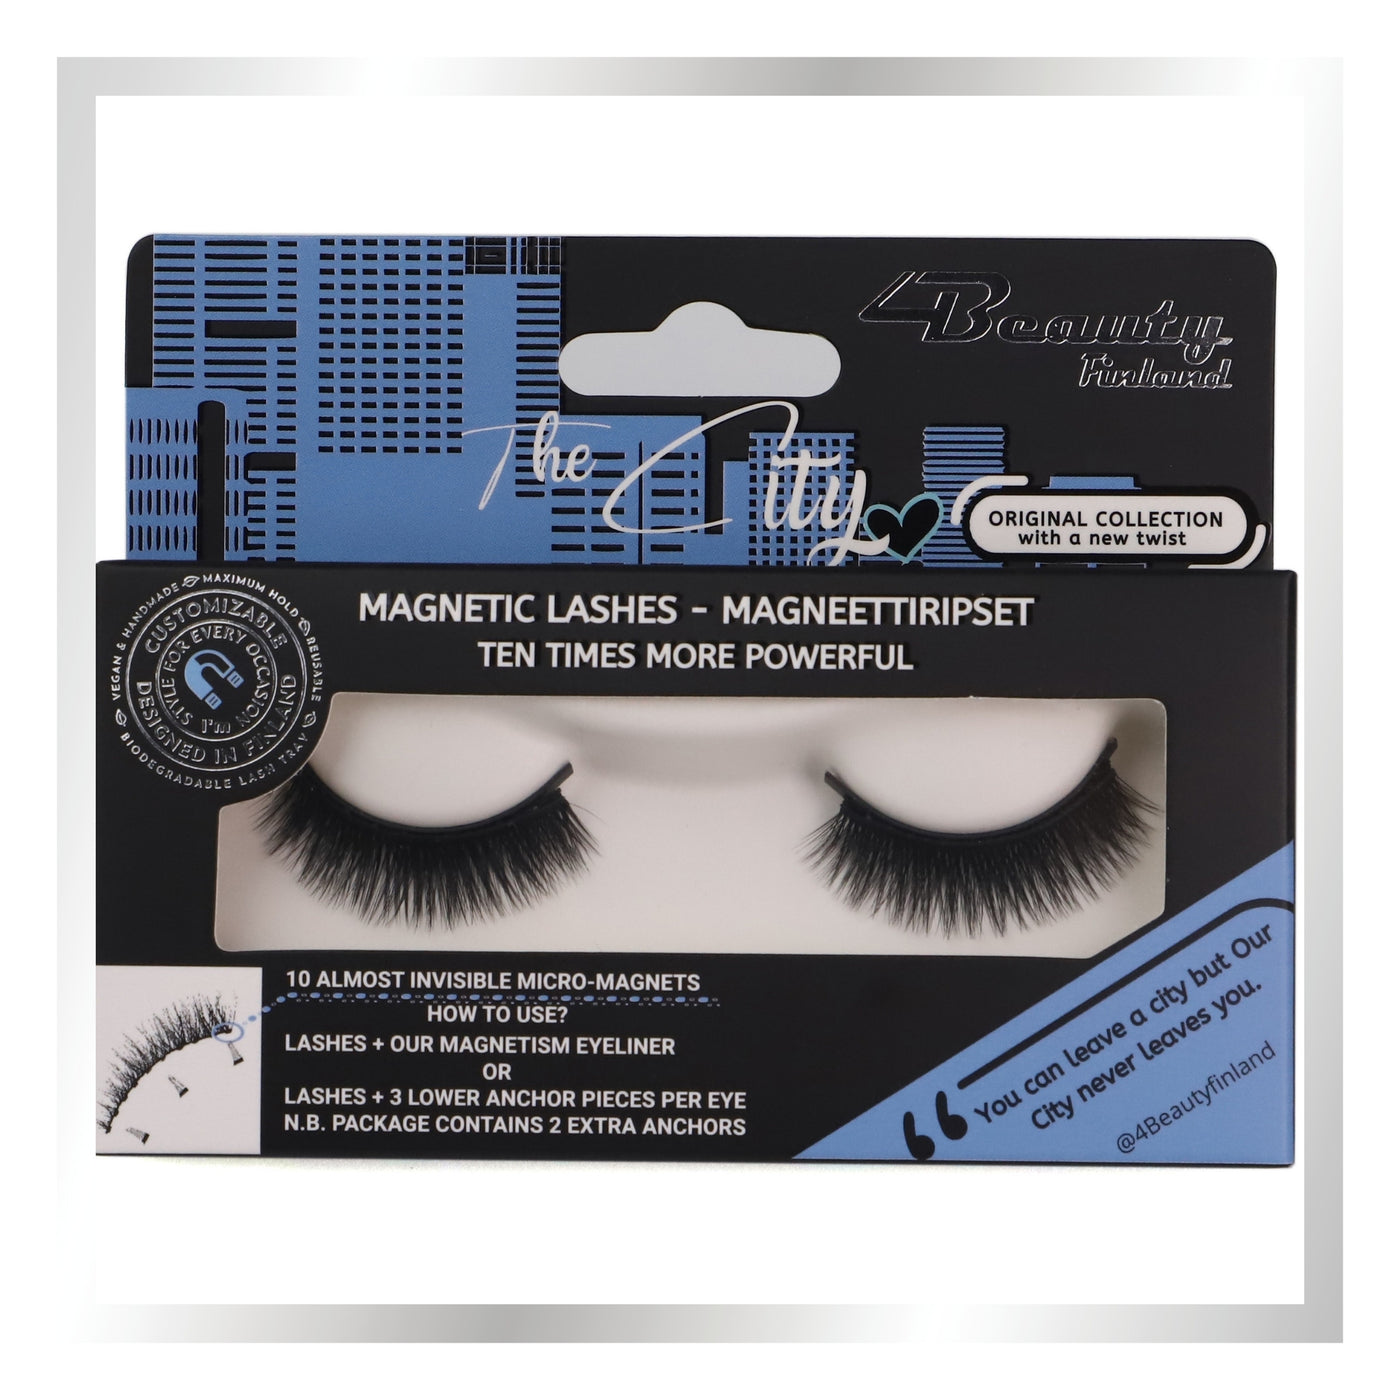 Magneettiripset 4Beauty Finland Magnetic Lashes The City Nizza